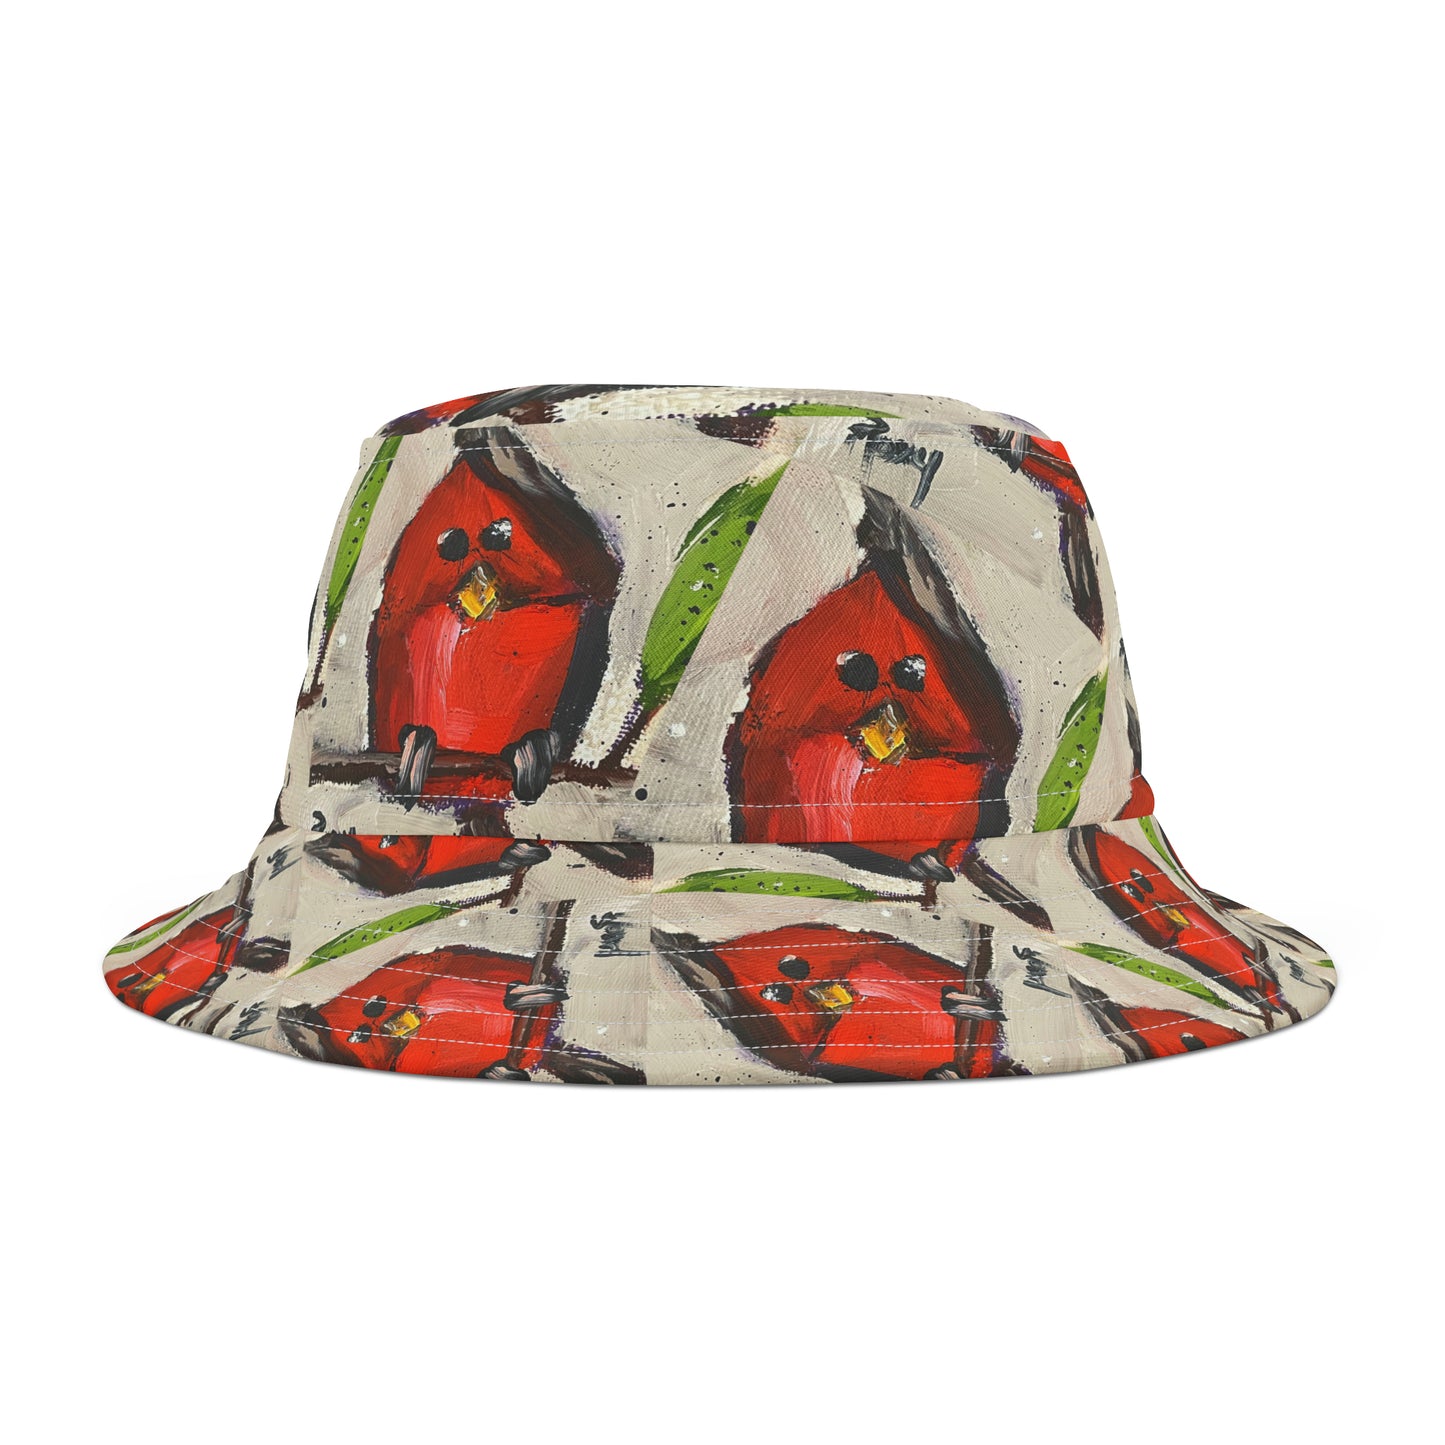 Whimsical Cardinal Chick Bucket Hat